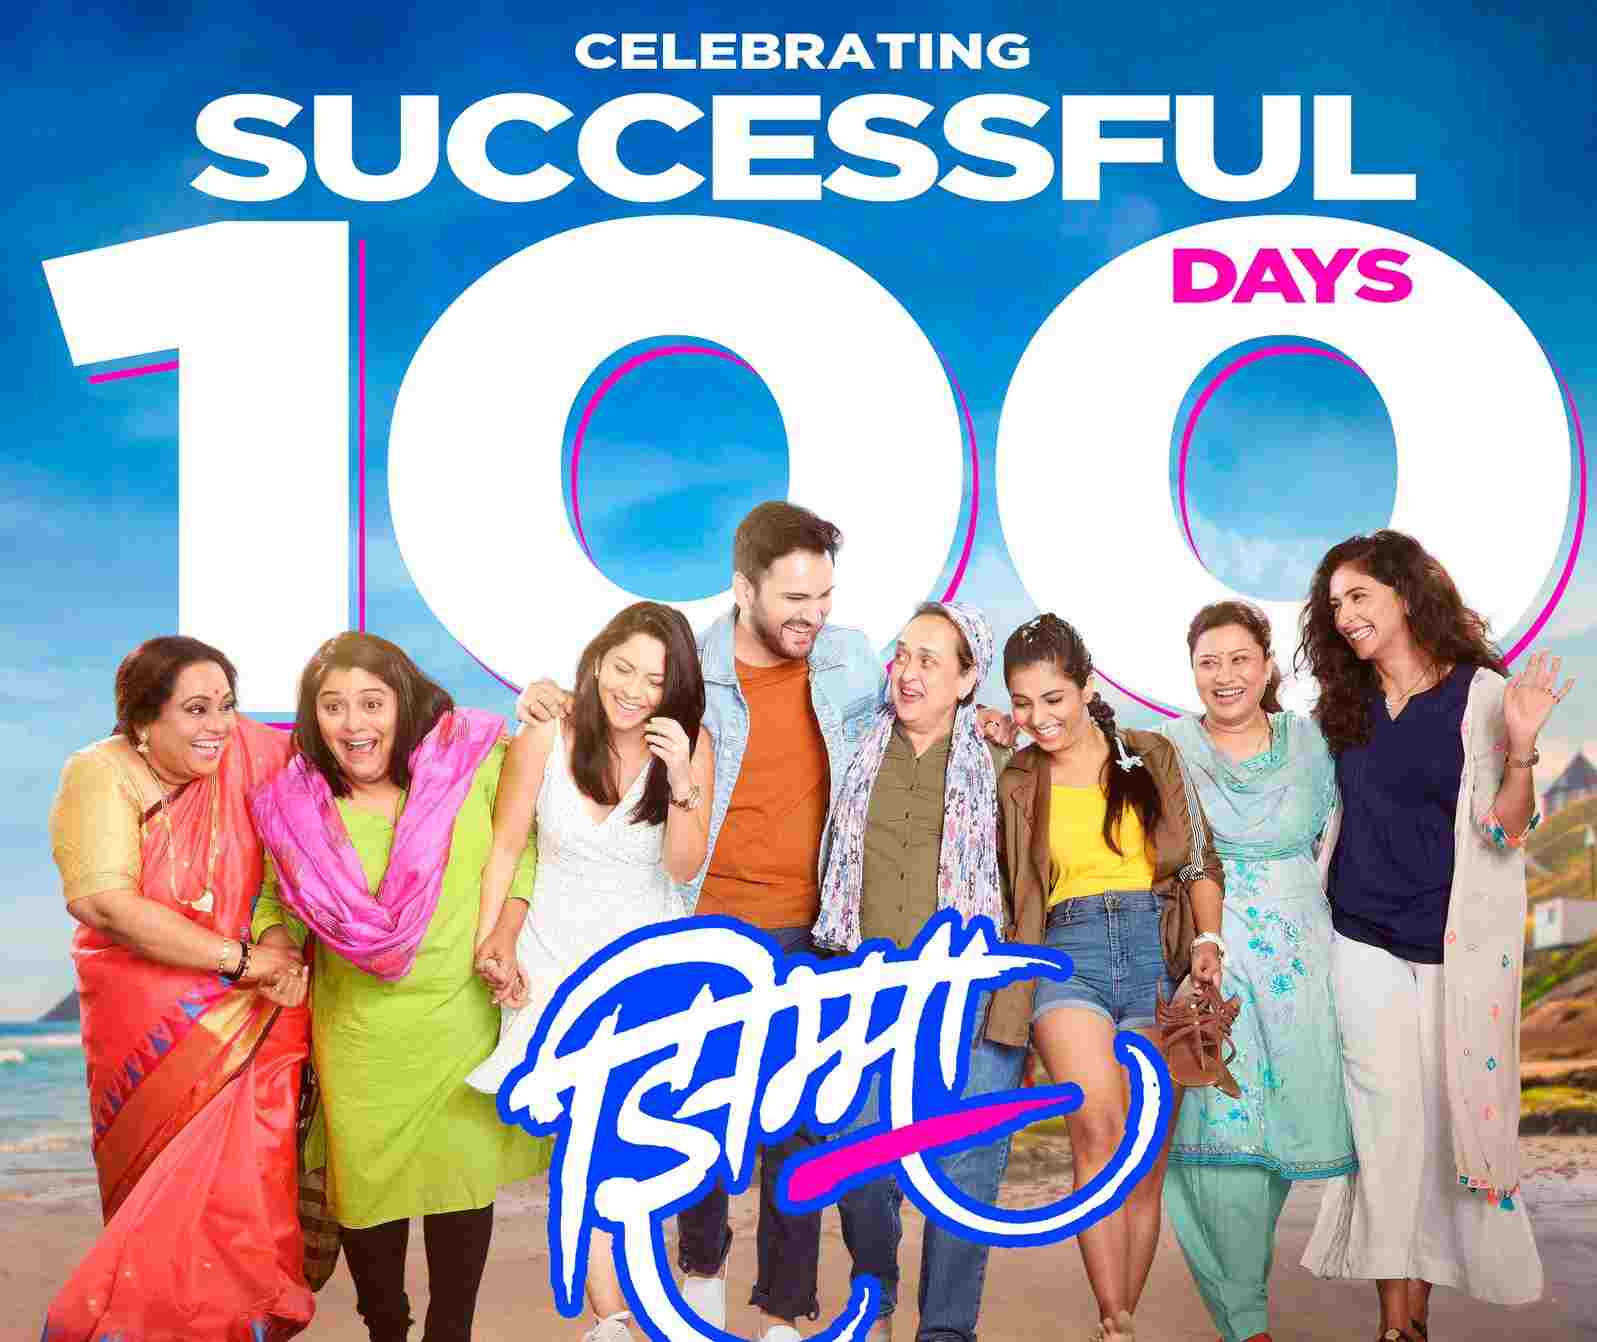 'Jhimma' directed by Hemant Dhome has completed 100 successful days in cinemas